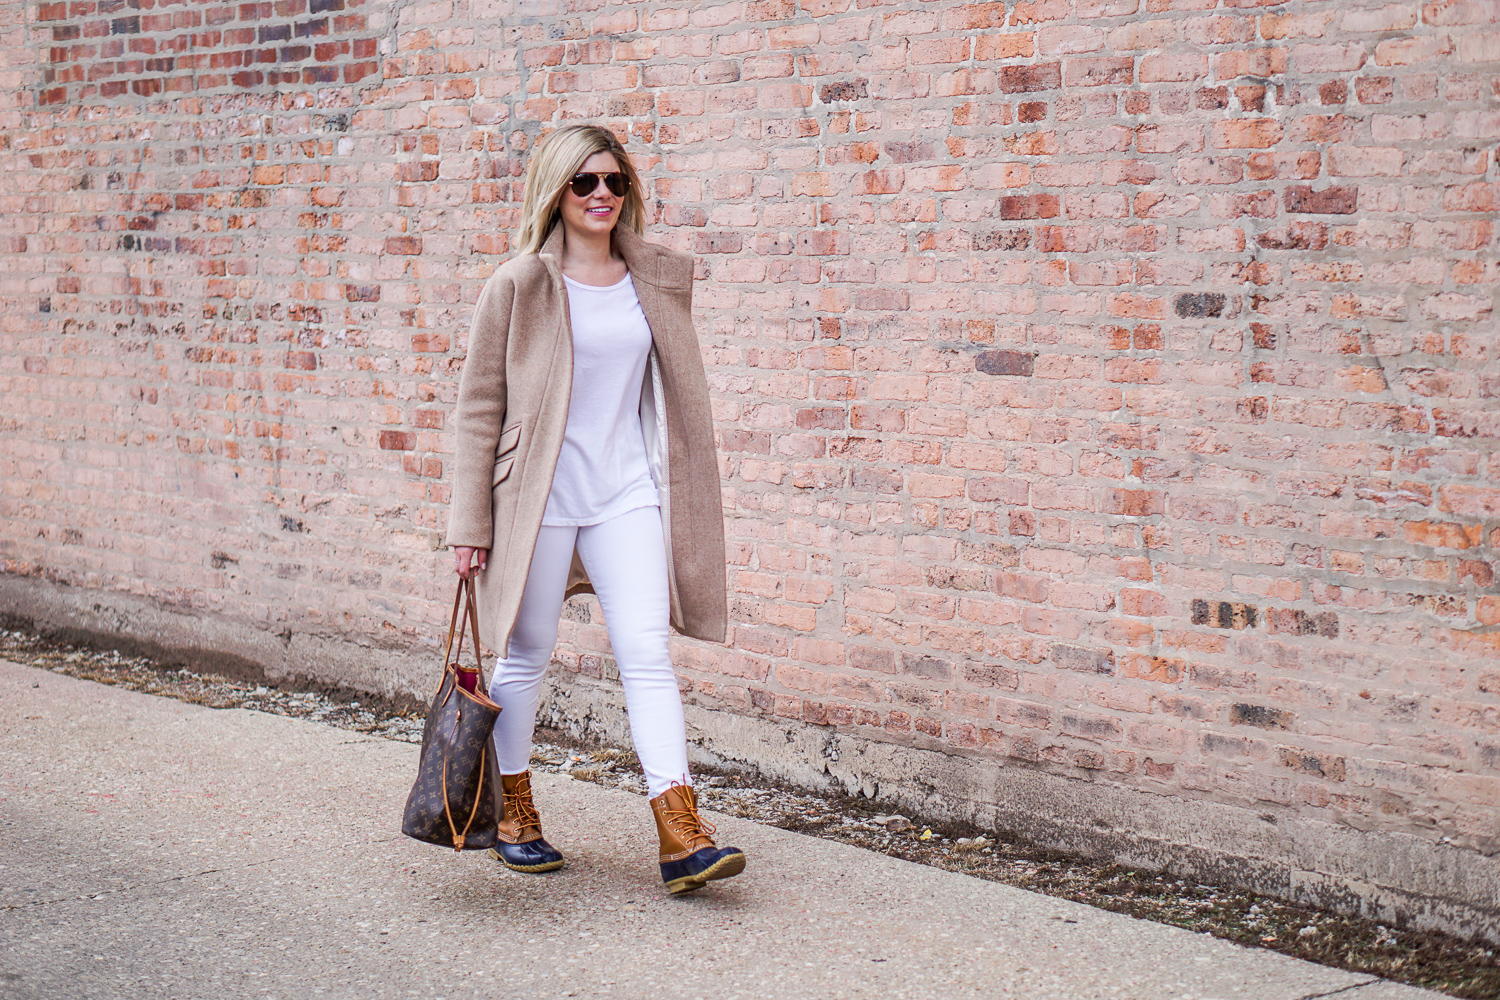 How I'm Changing Up My Style This Year - Cashmere & Jeans